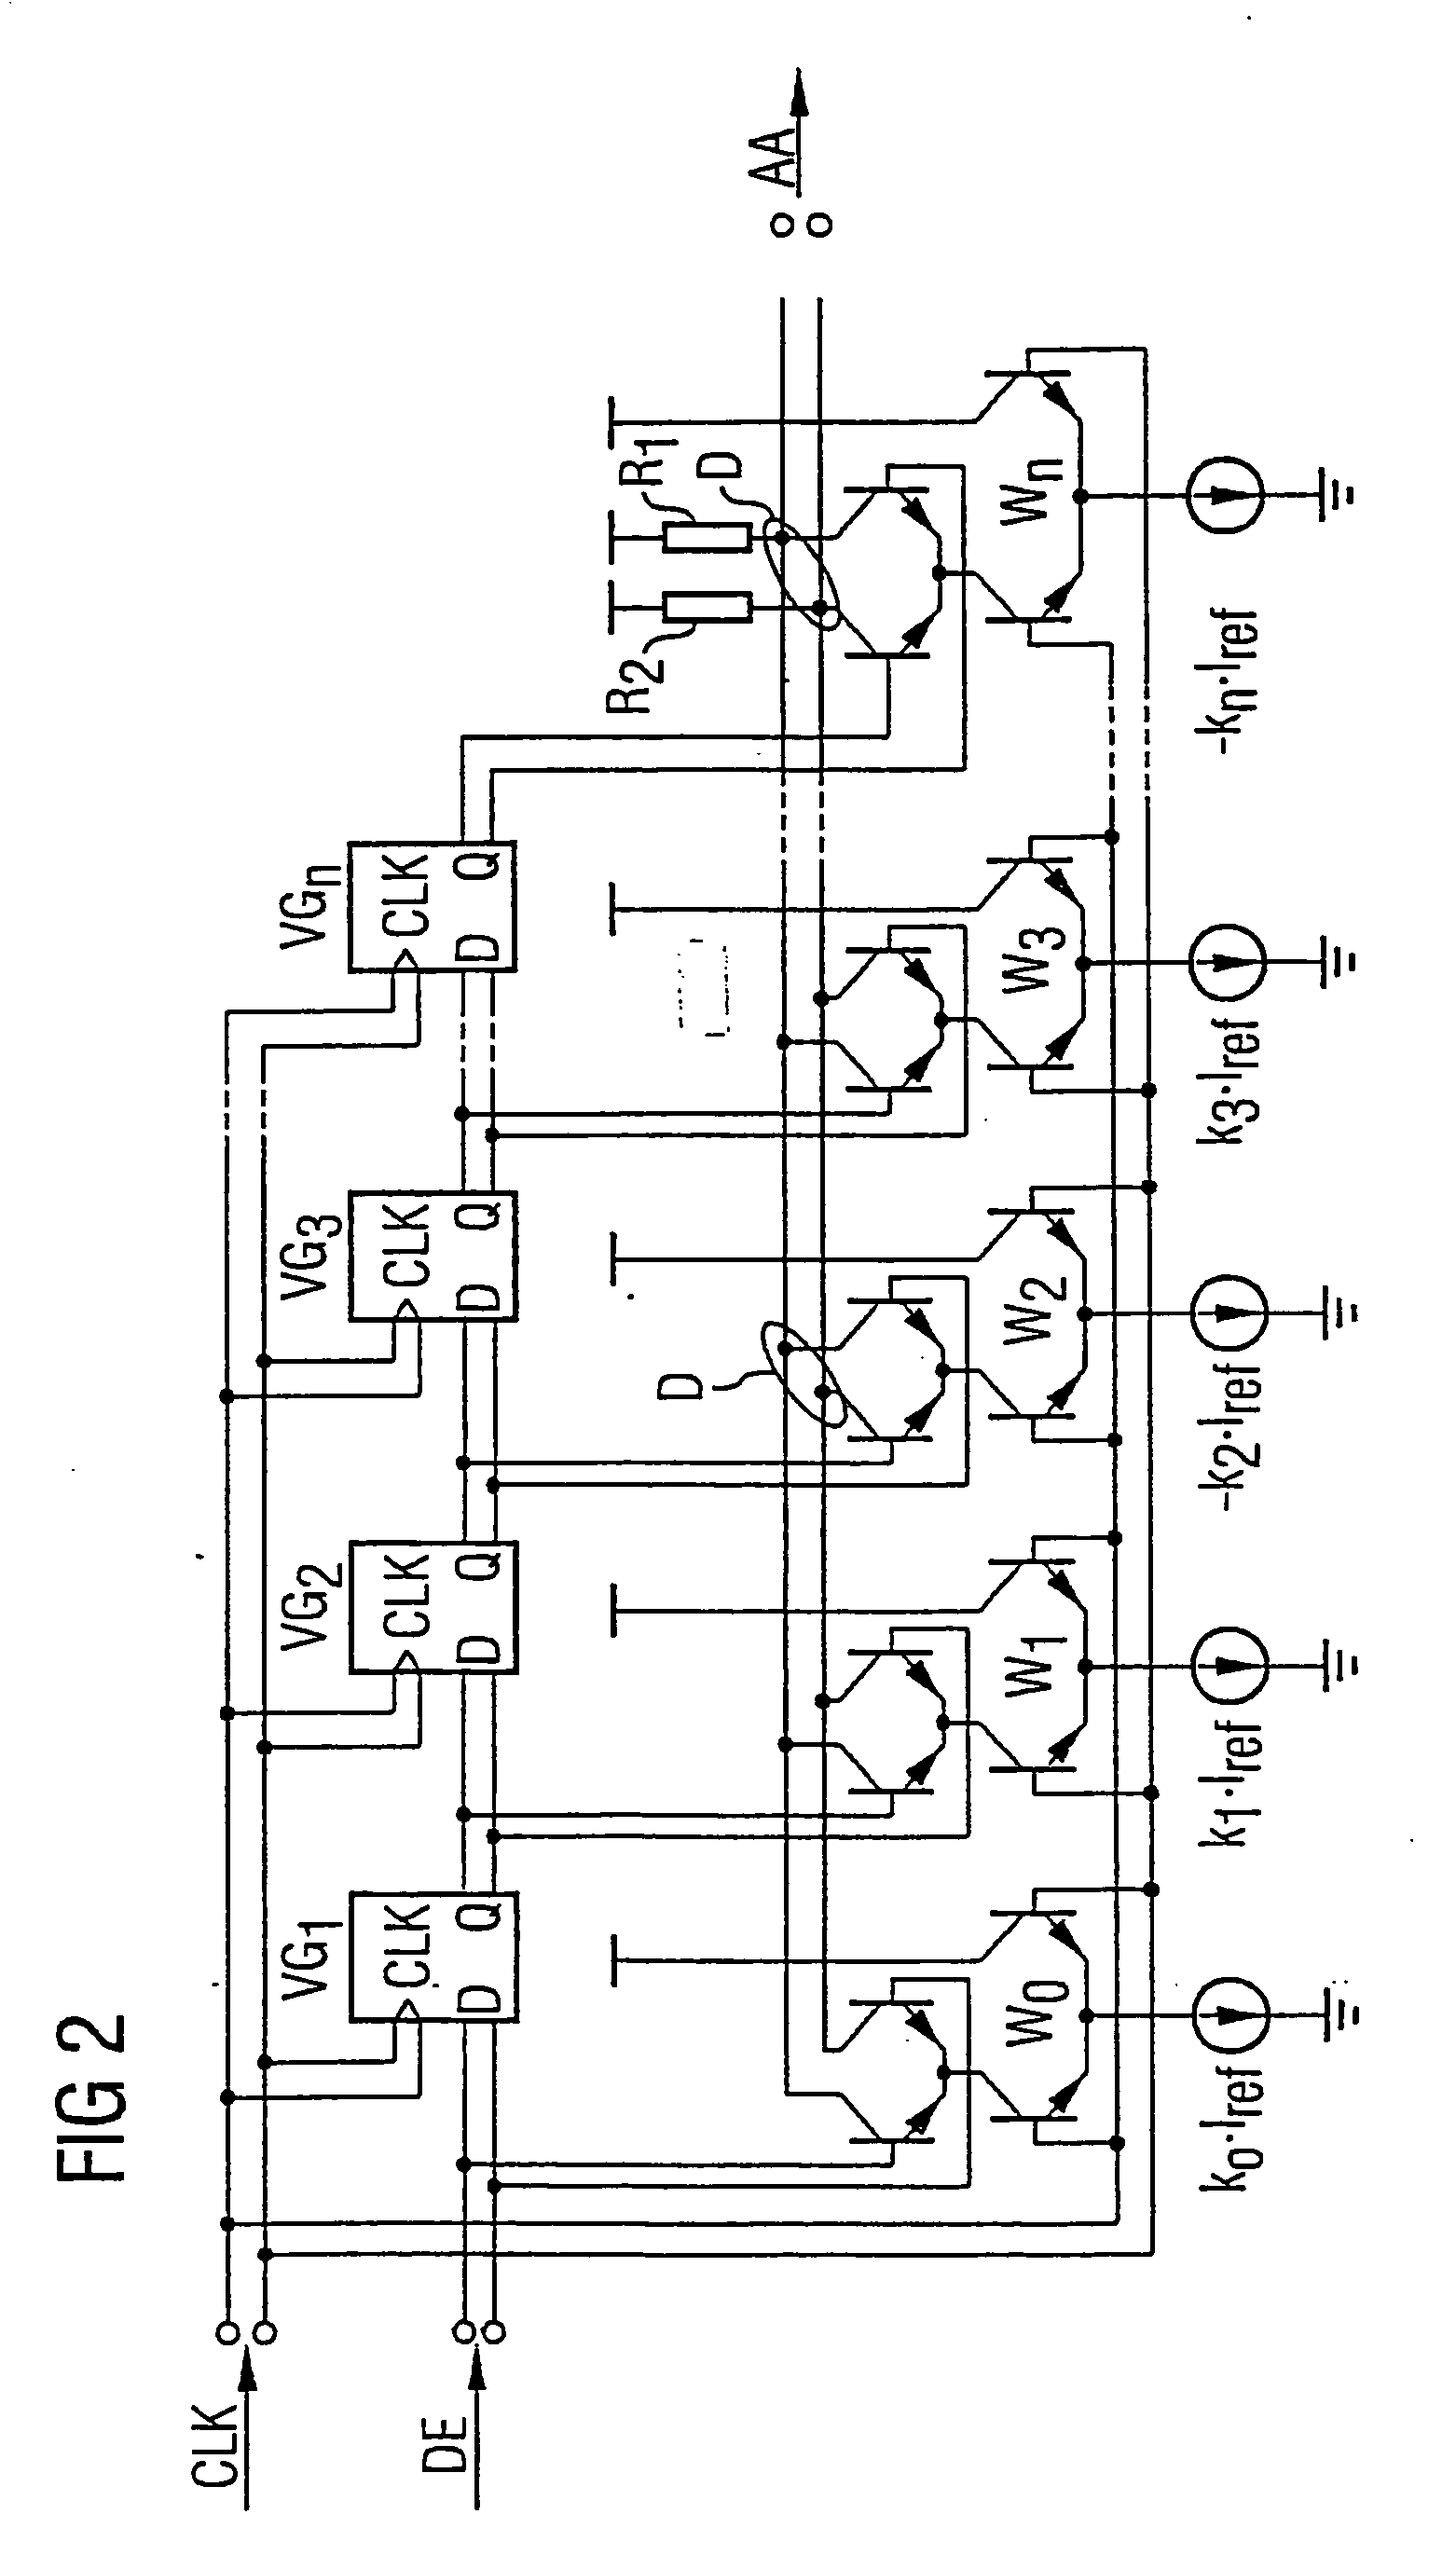 Configuration for digital-analog conversion of high-frequency digital input signal into carrier-frequency analog output signal